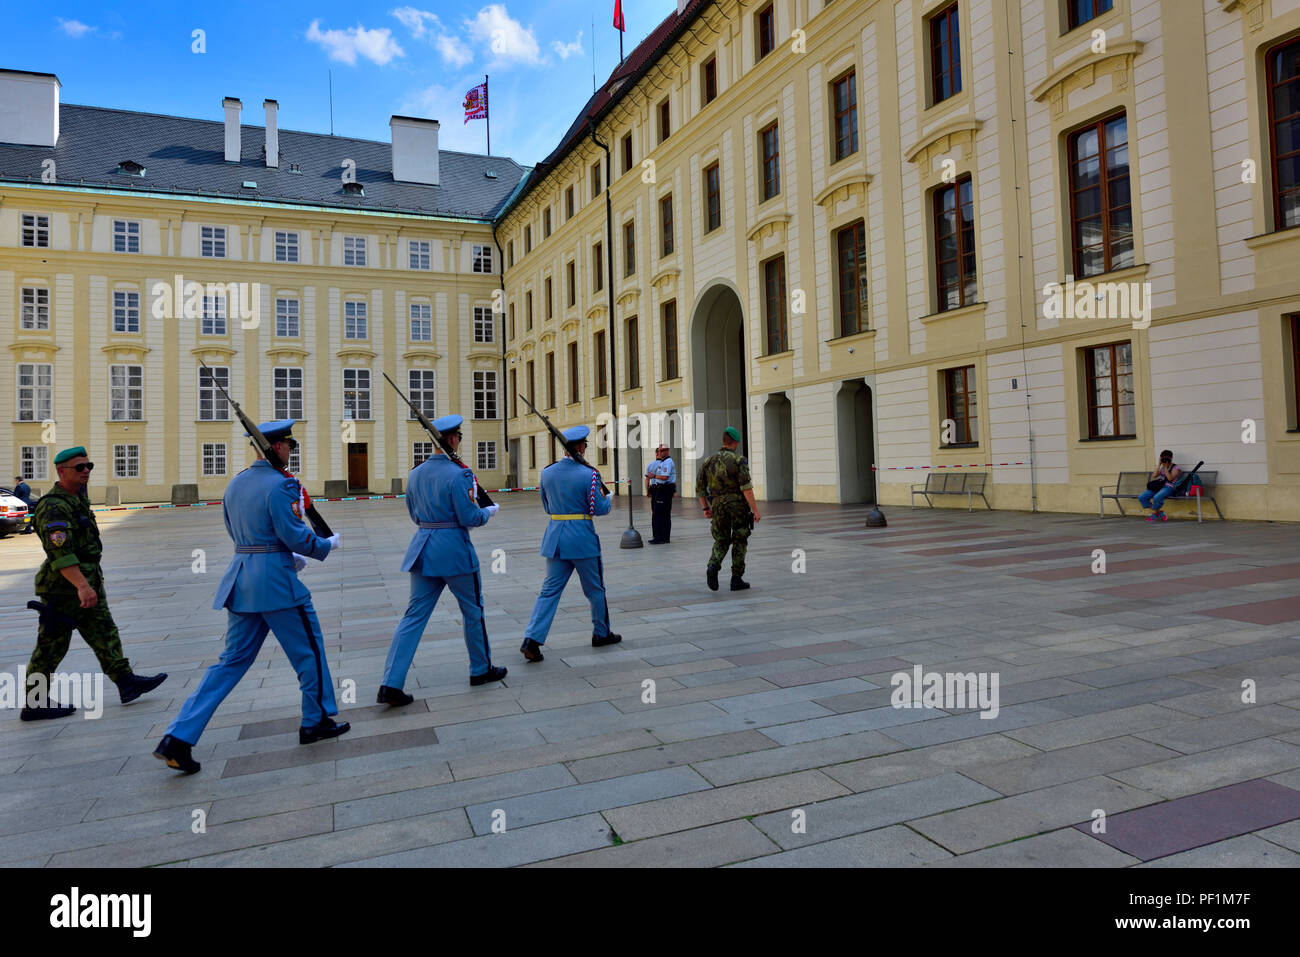 Marching solders inside Prague castle dating from the 9th century, 2nd courtyard, Czech Republic Stock Photo